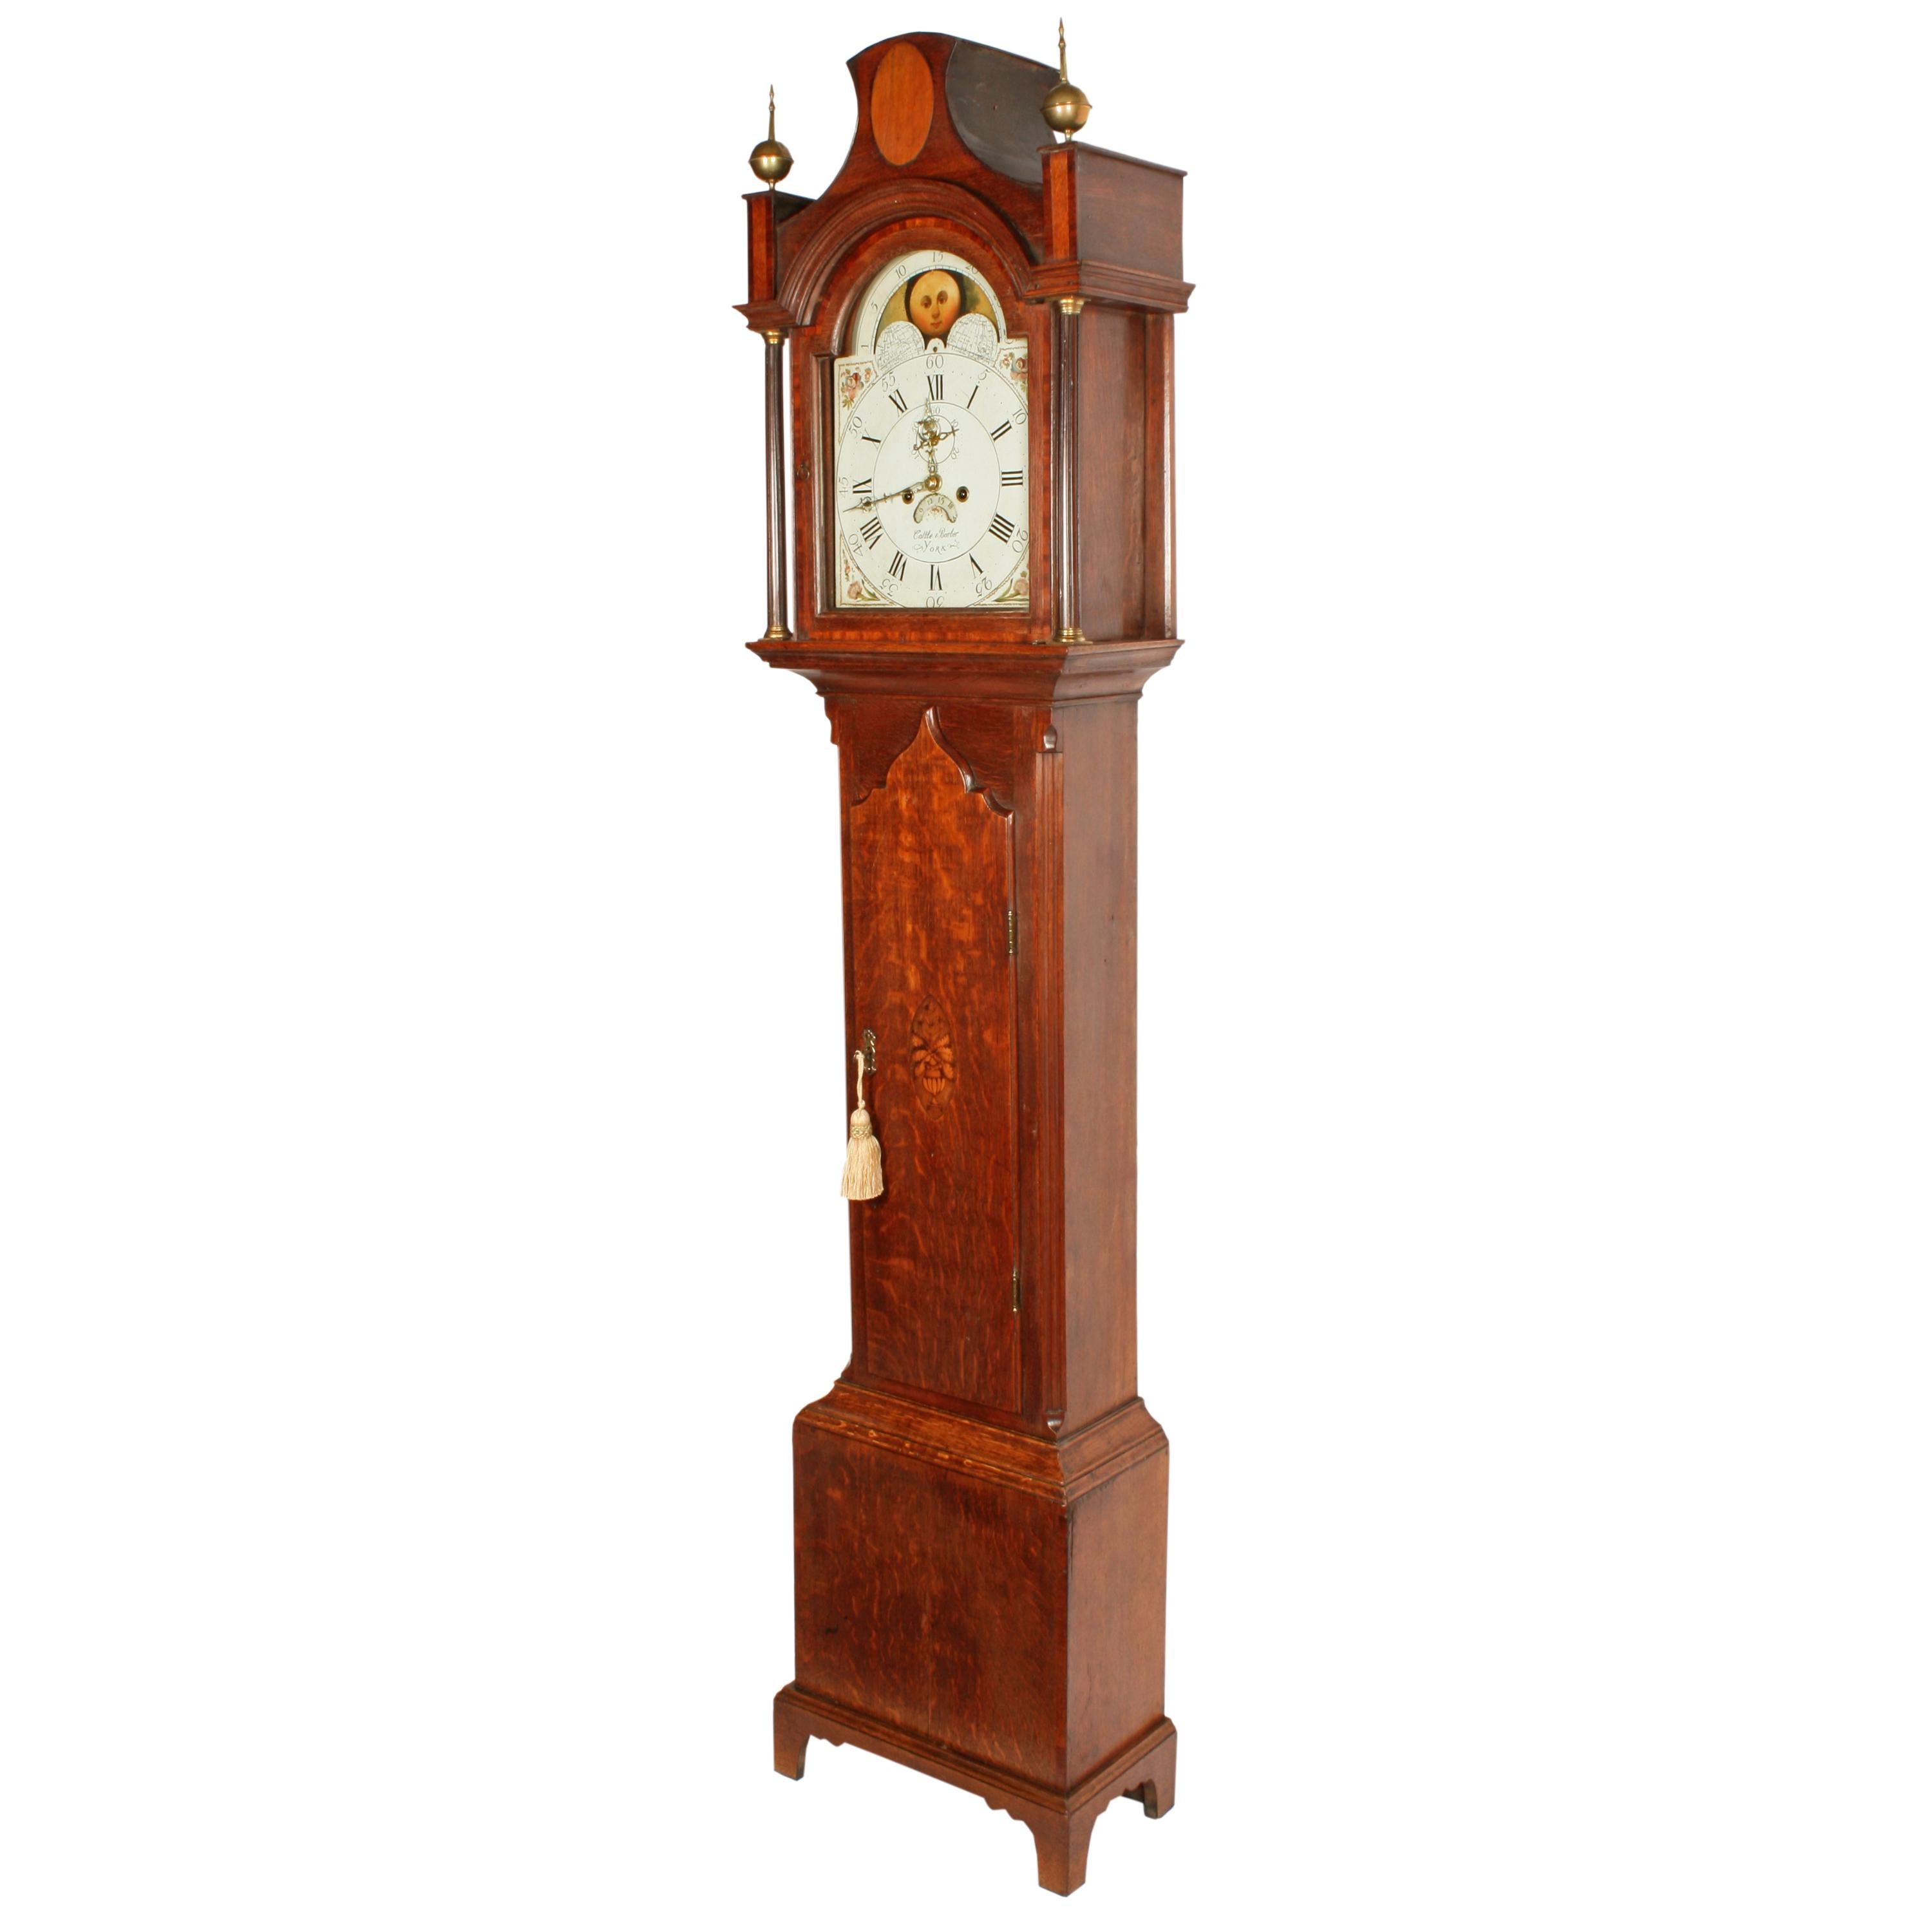 A late 18th-early 19th century oak cased rolling moon grandfather clock.

The clock has a rolling moon painted dial with an eight day movement with an hour strike and a secondary dial.

At the top of the dial is the lunar calendar rolling moon